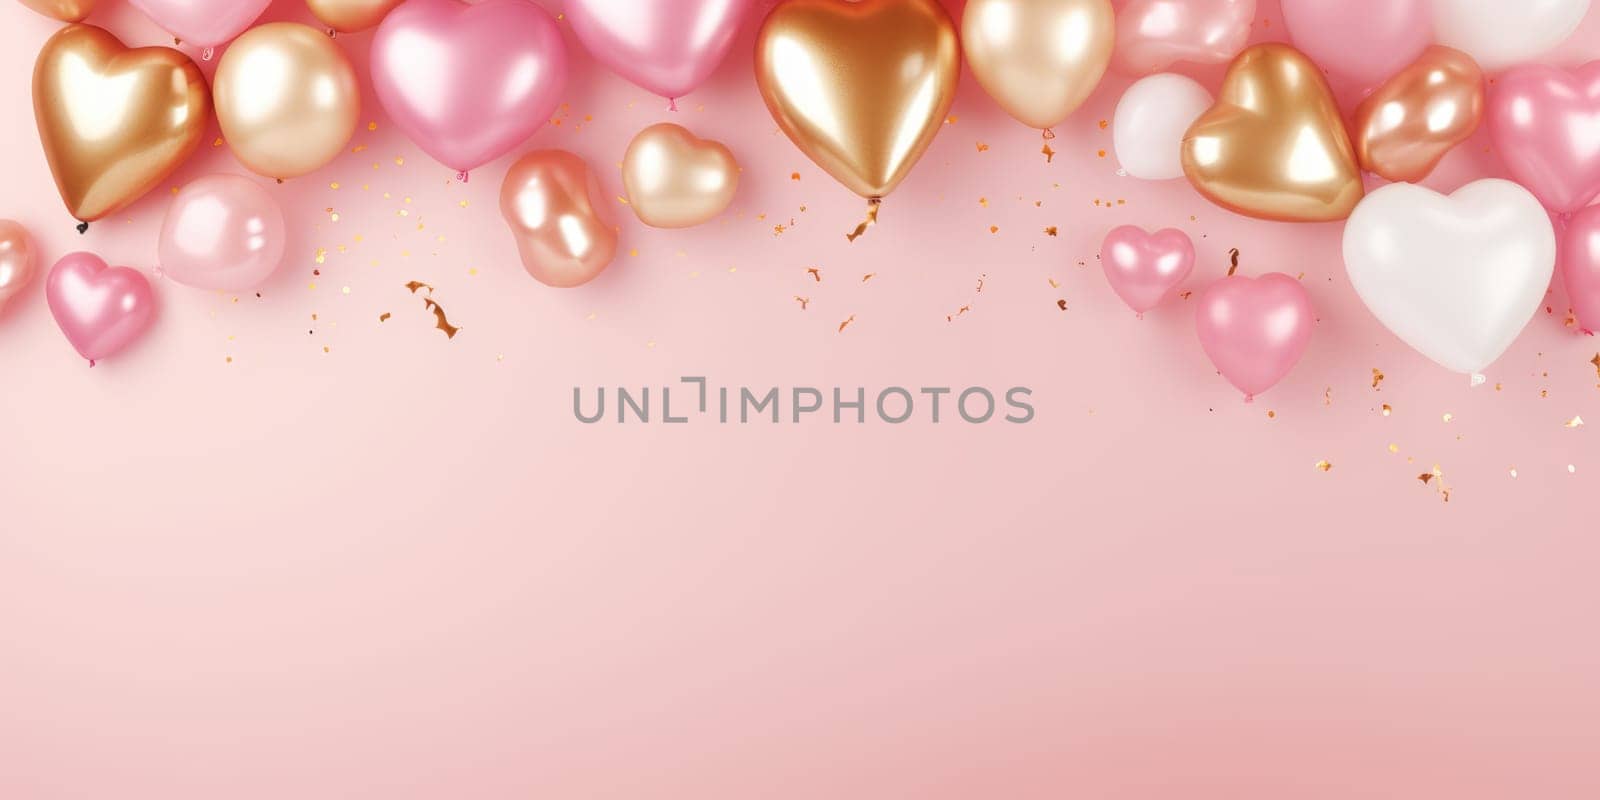 Pink and gold air balloons on white background. Concept wedding, valentines day, photo zone, lovers, birthday. Banner. by JuliaDorian